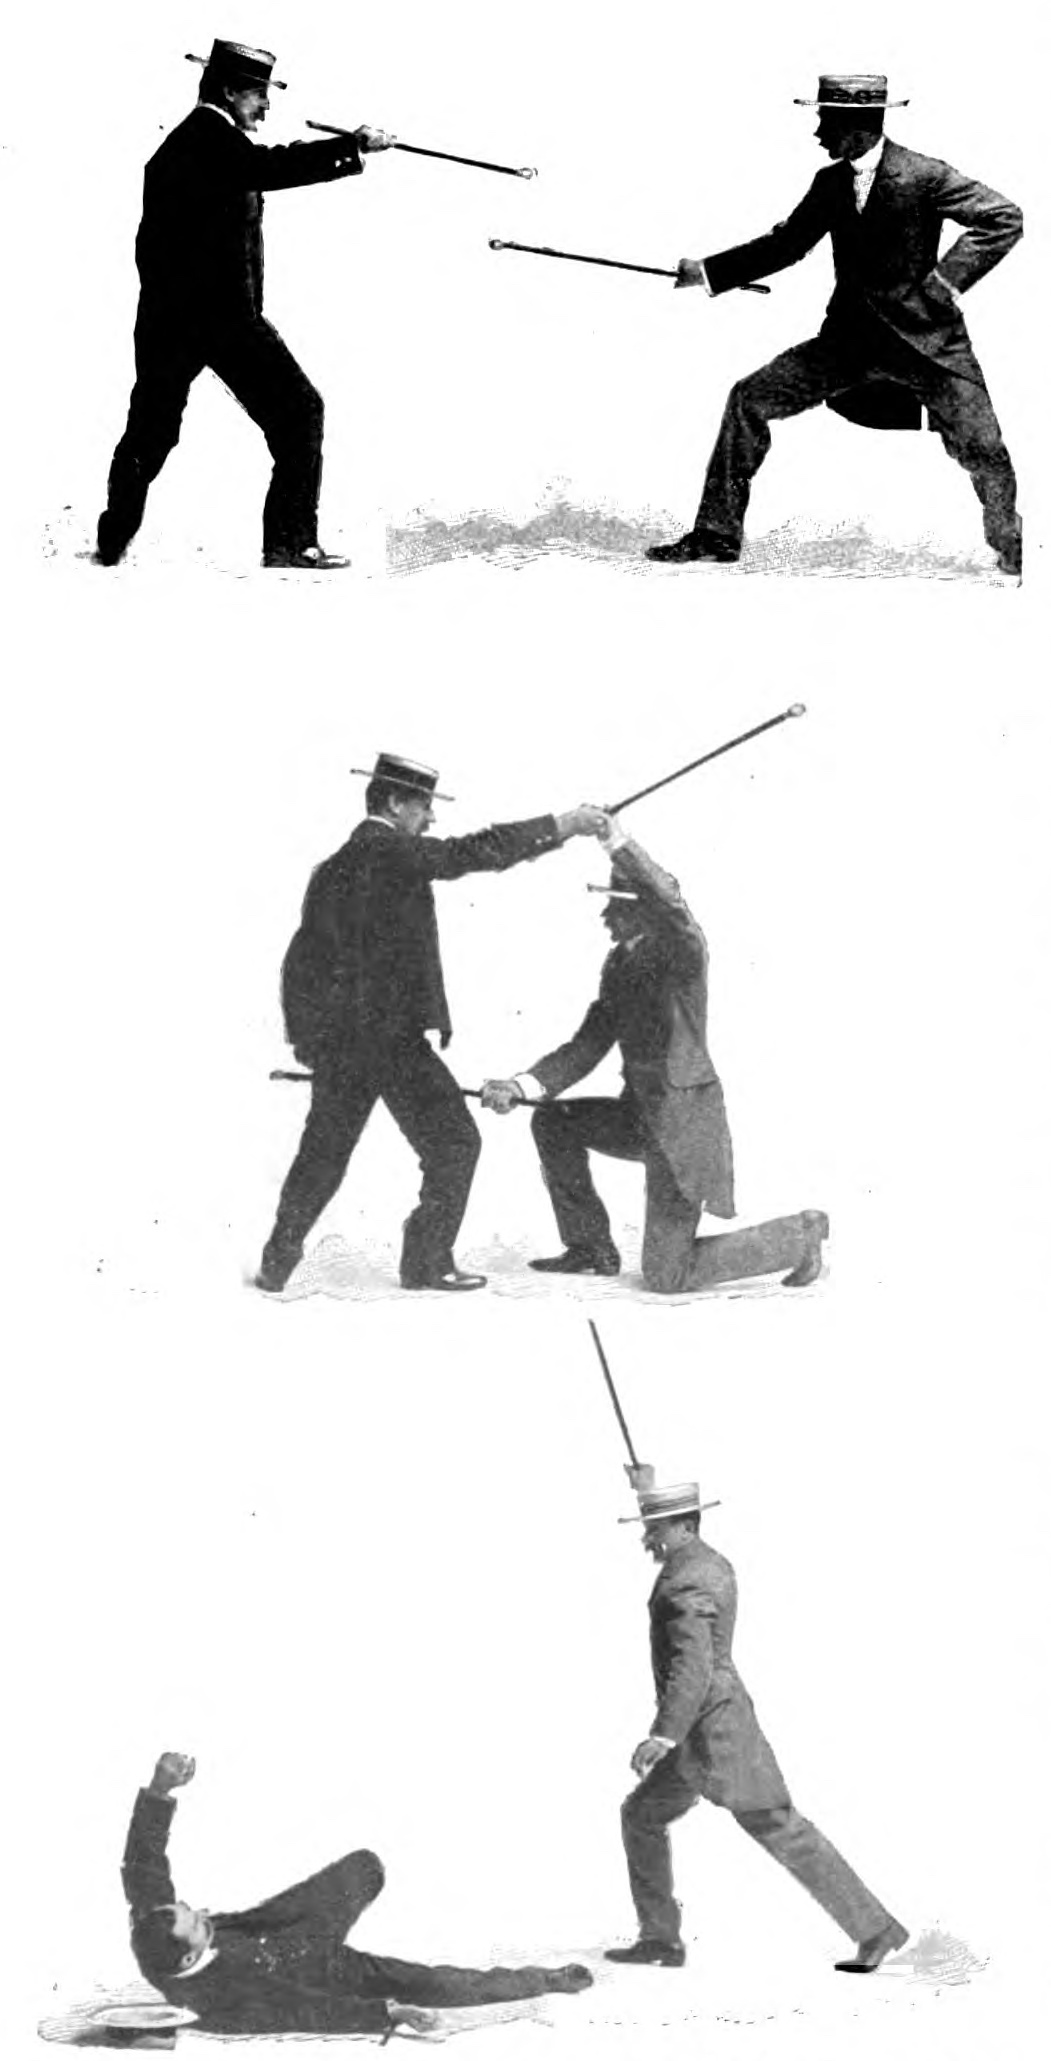 self-defence in public